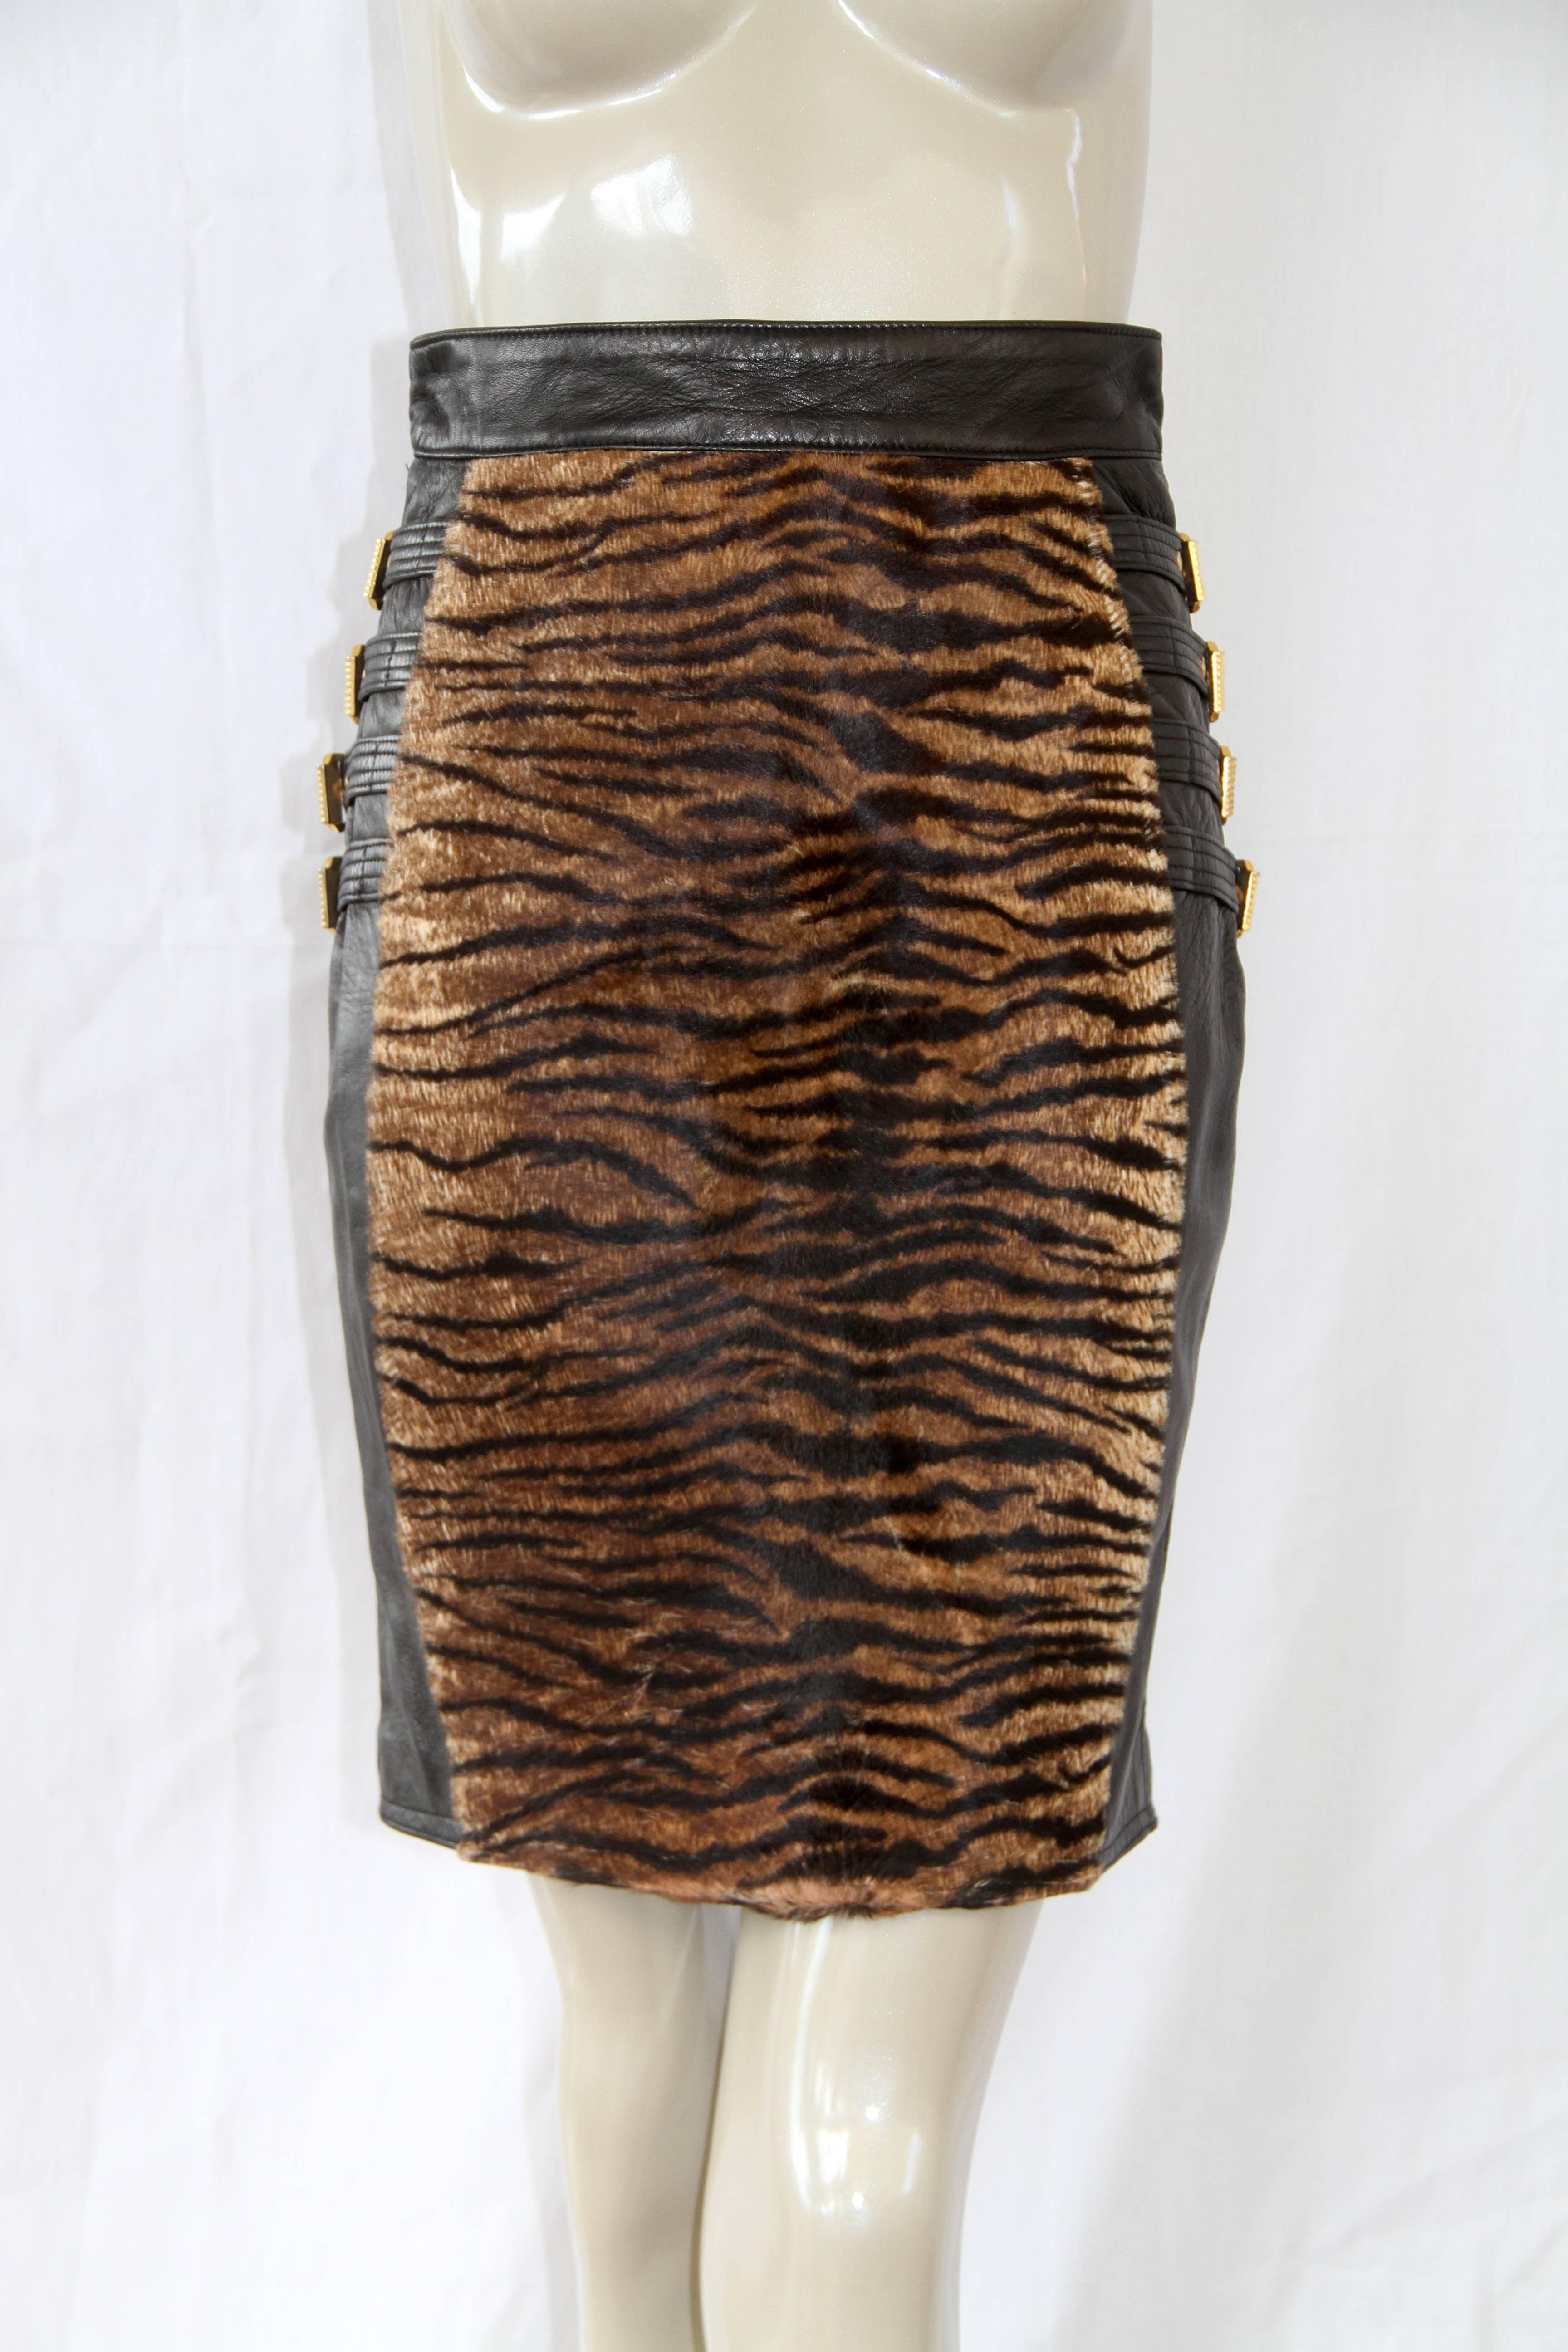 Gianni Versace leather and animal print fur skirt, with bondage buckle detailing, from the Fall 1992 Bondage collection.

Marked an Italian size 40.

Manufacturer - Ruffo S.p.a.

Fabric content - 100% leather